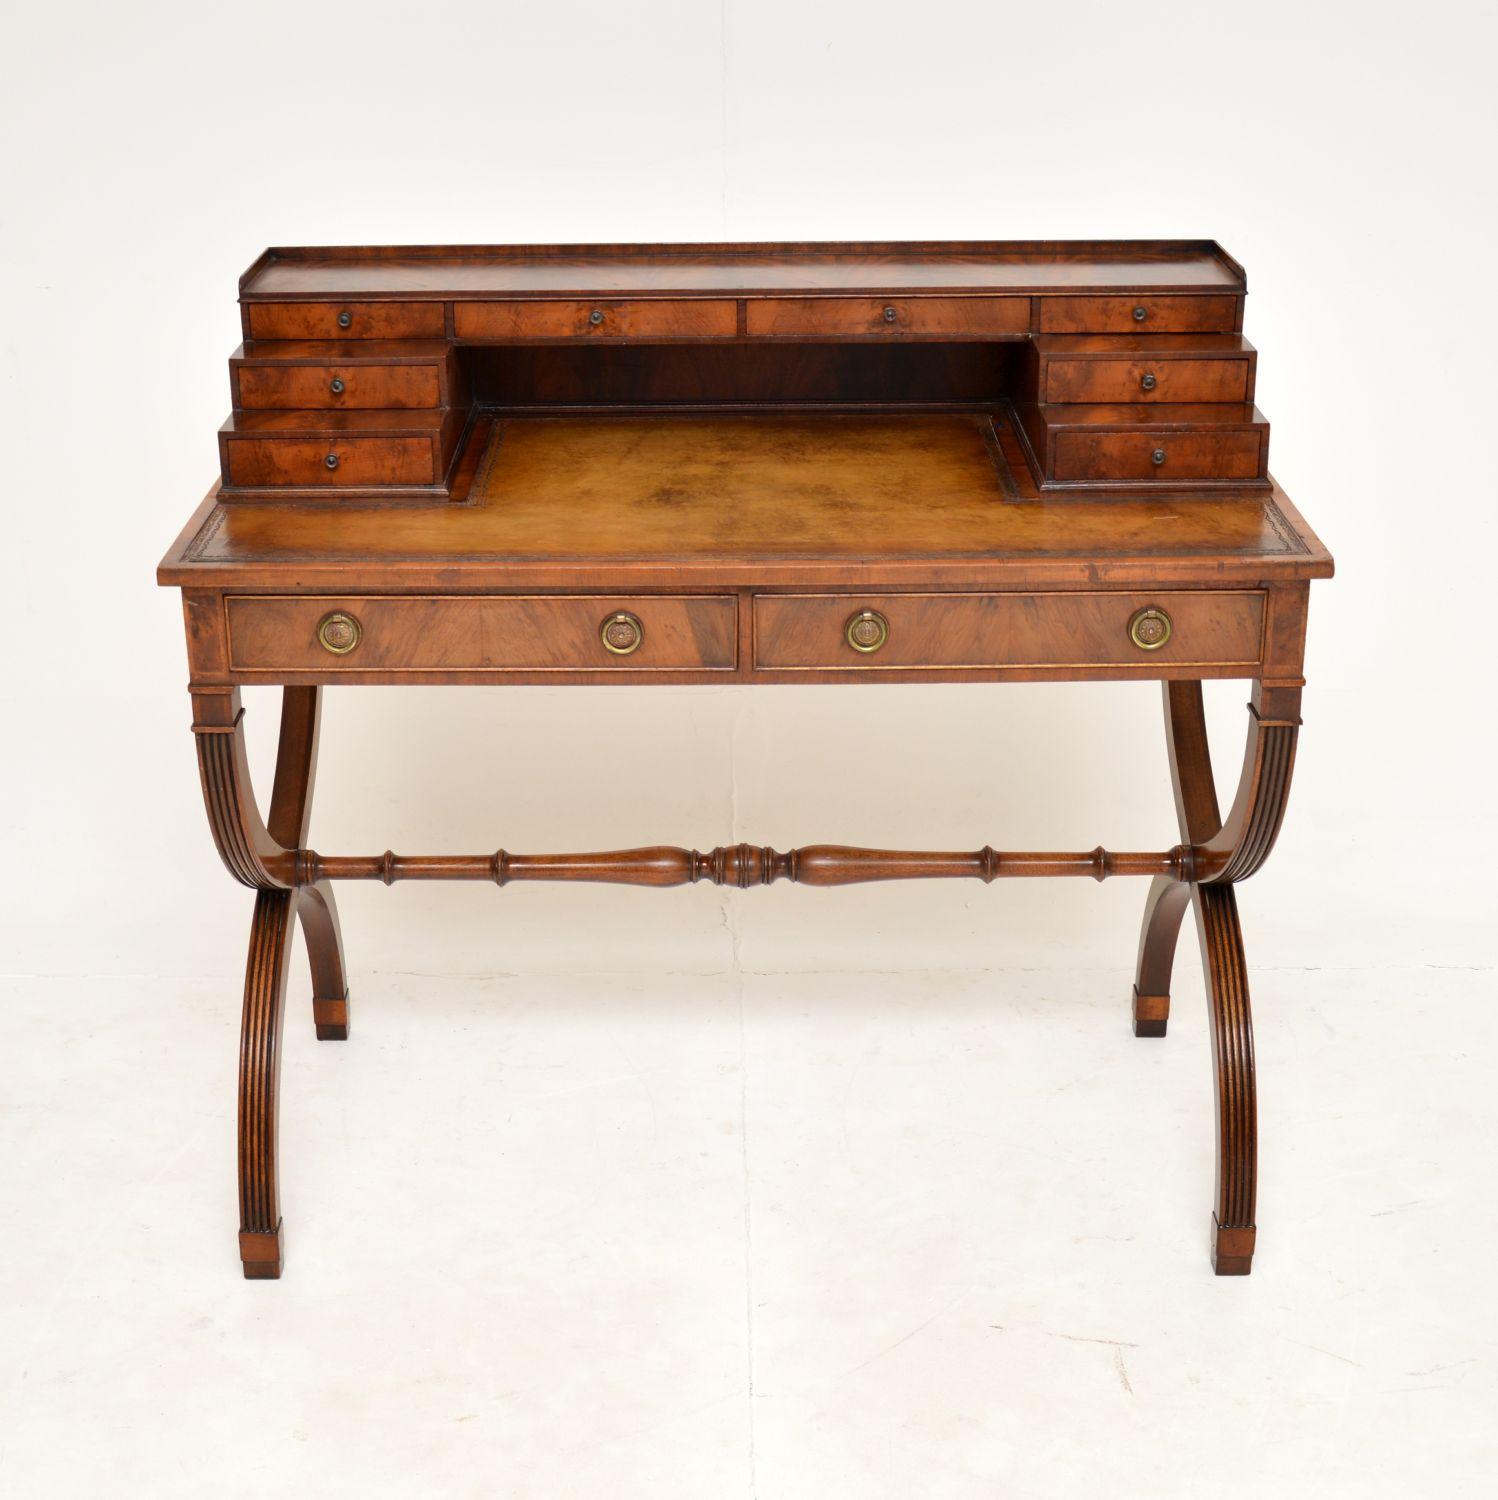 A beautiful antique writing desk in the Regency style. This was made in England, it dates from around the 1910-20’s.

It is of superb quality and is a very useful item. There is a generous work space with an inset tooled leather writing surface,